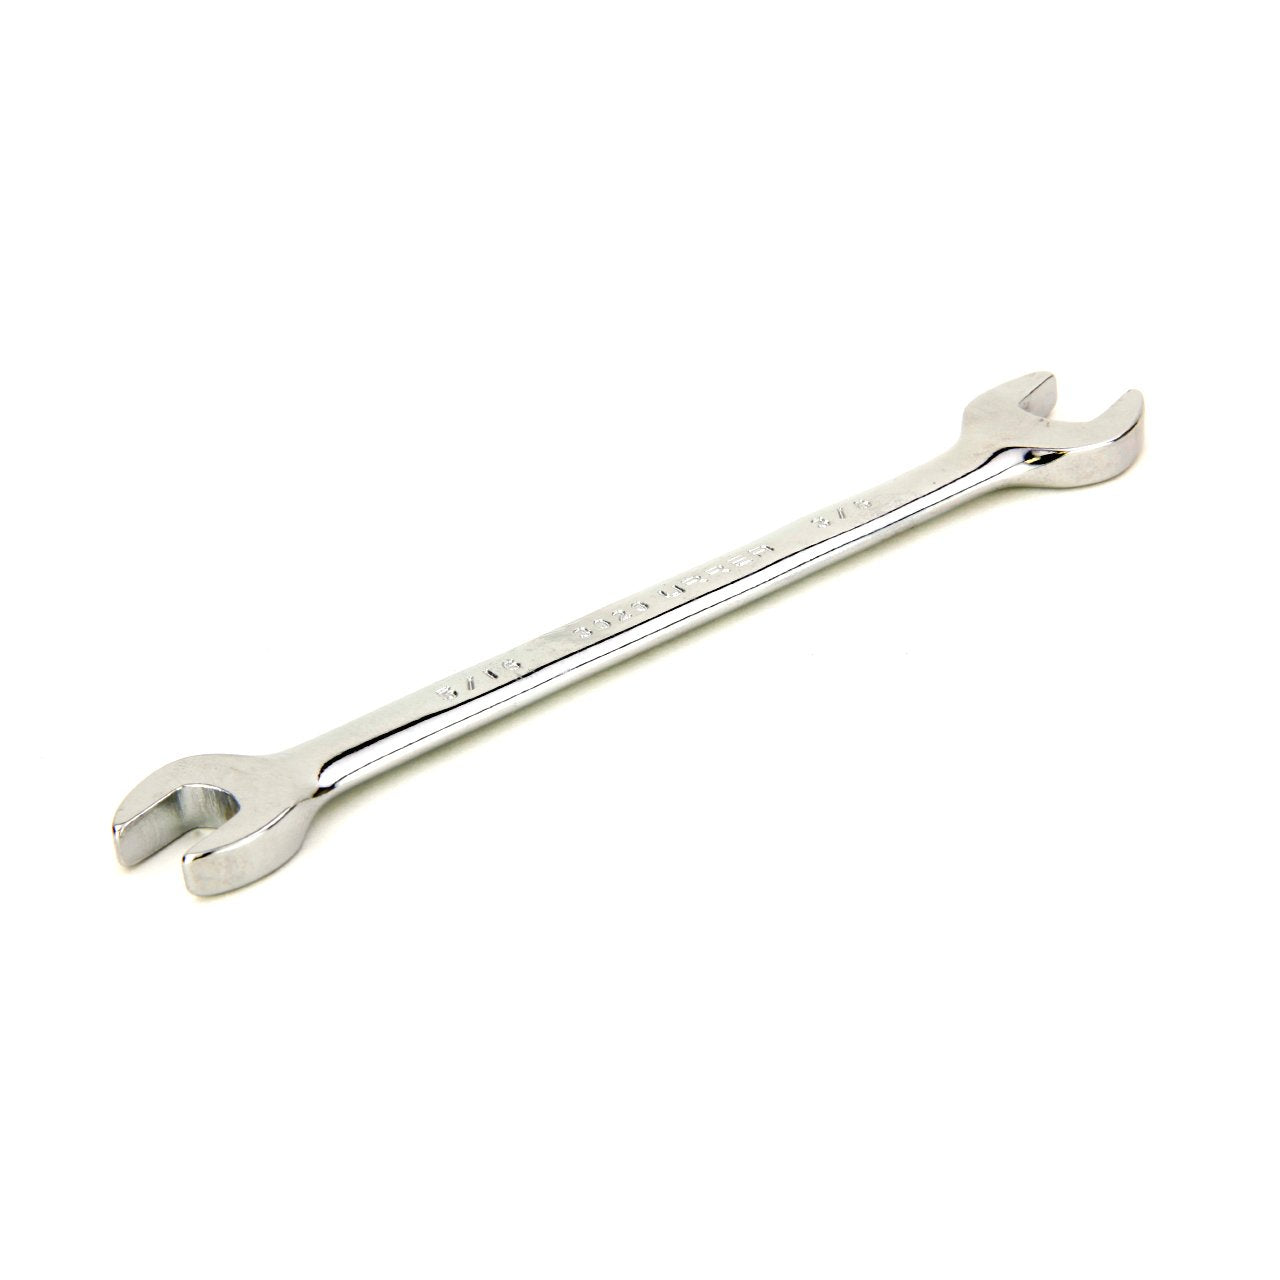 7218 Ammco Small  Wrench 5/16" X 3/8"